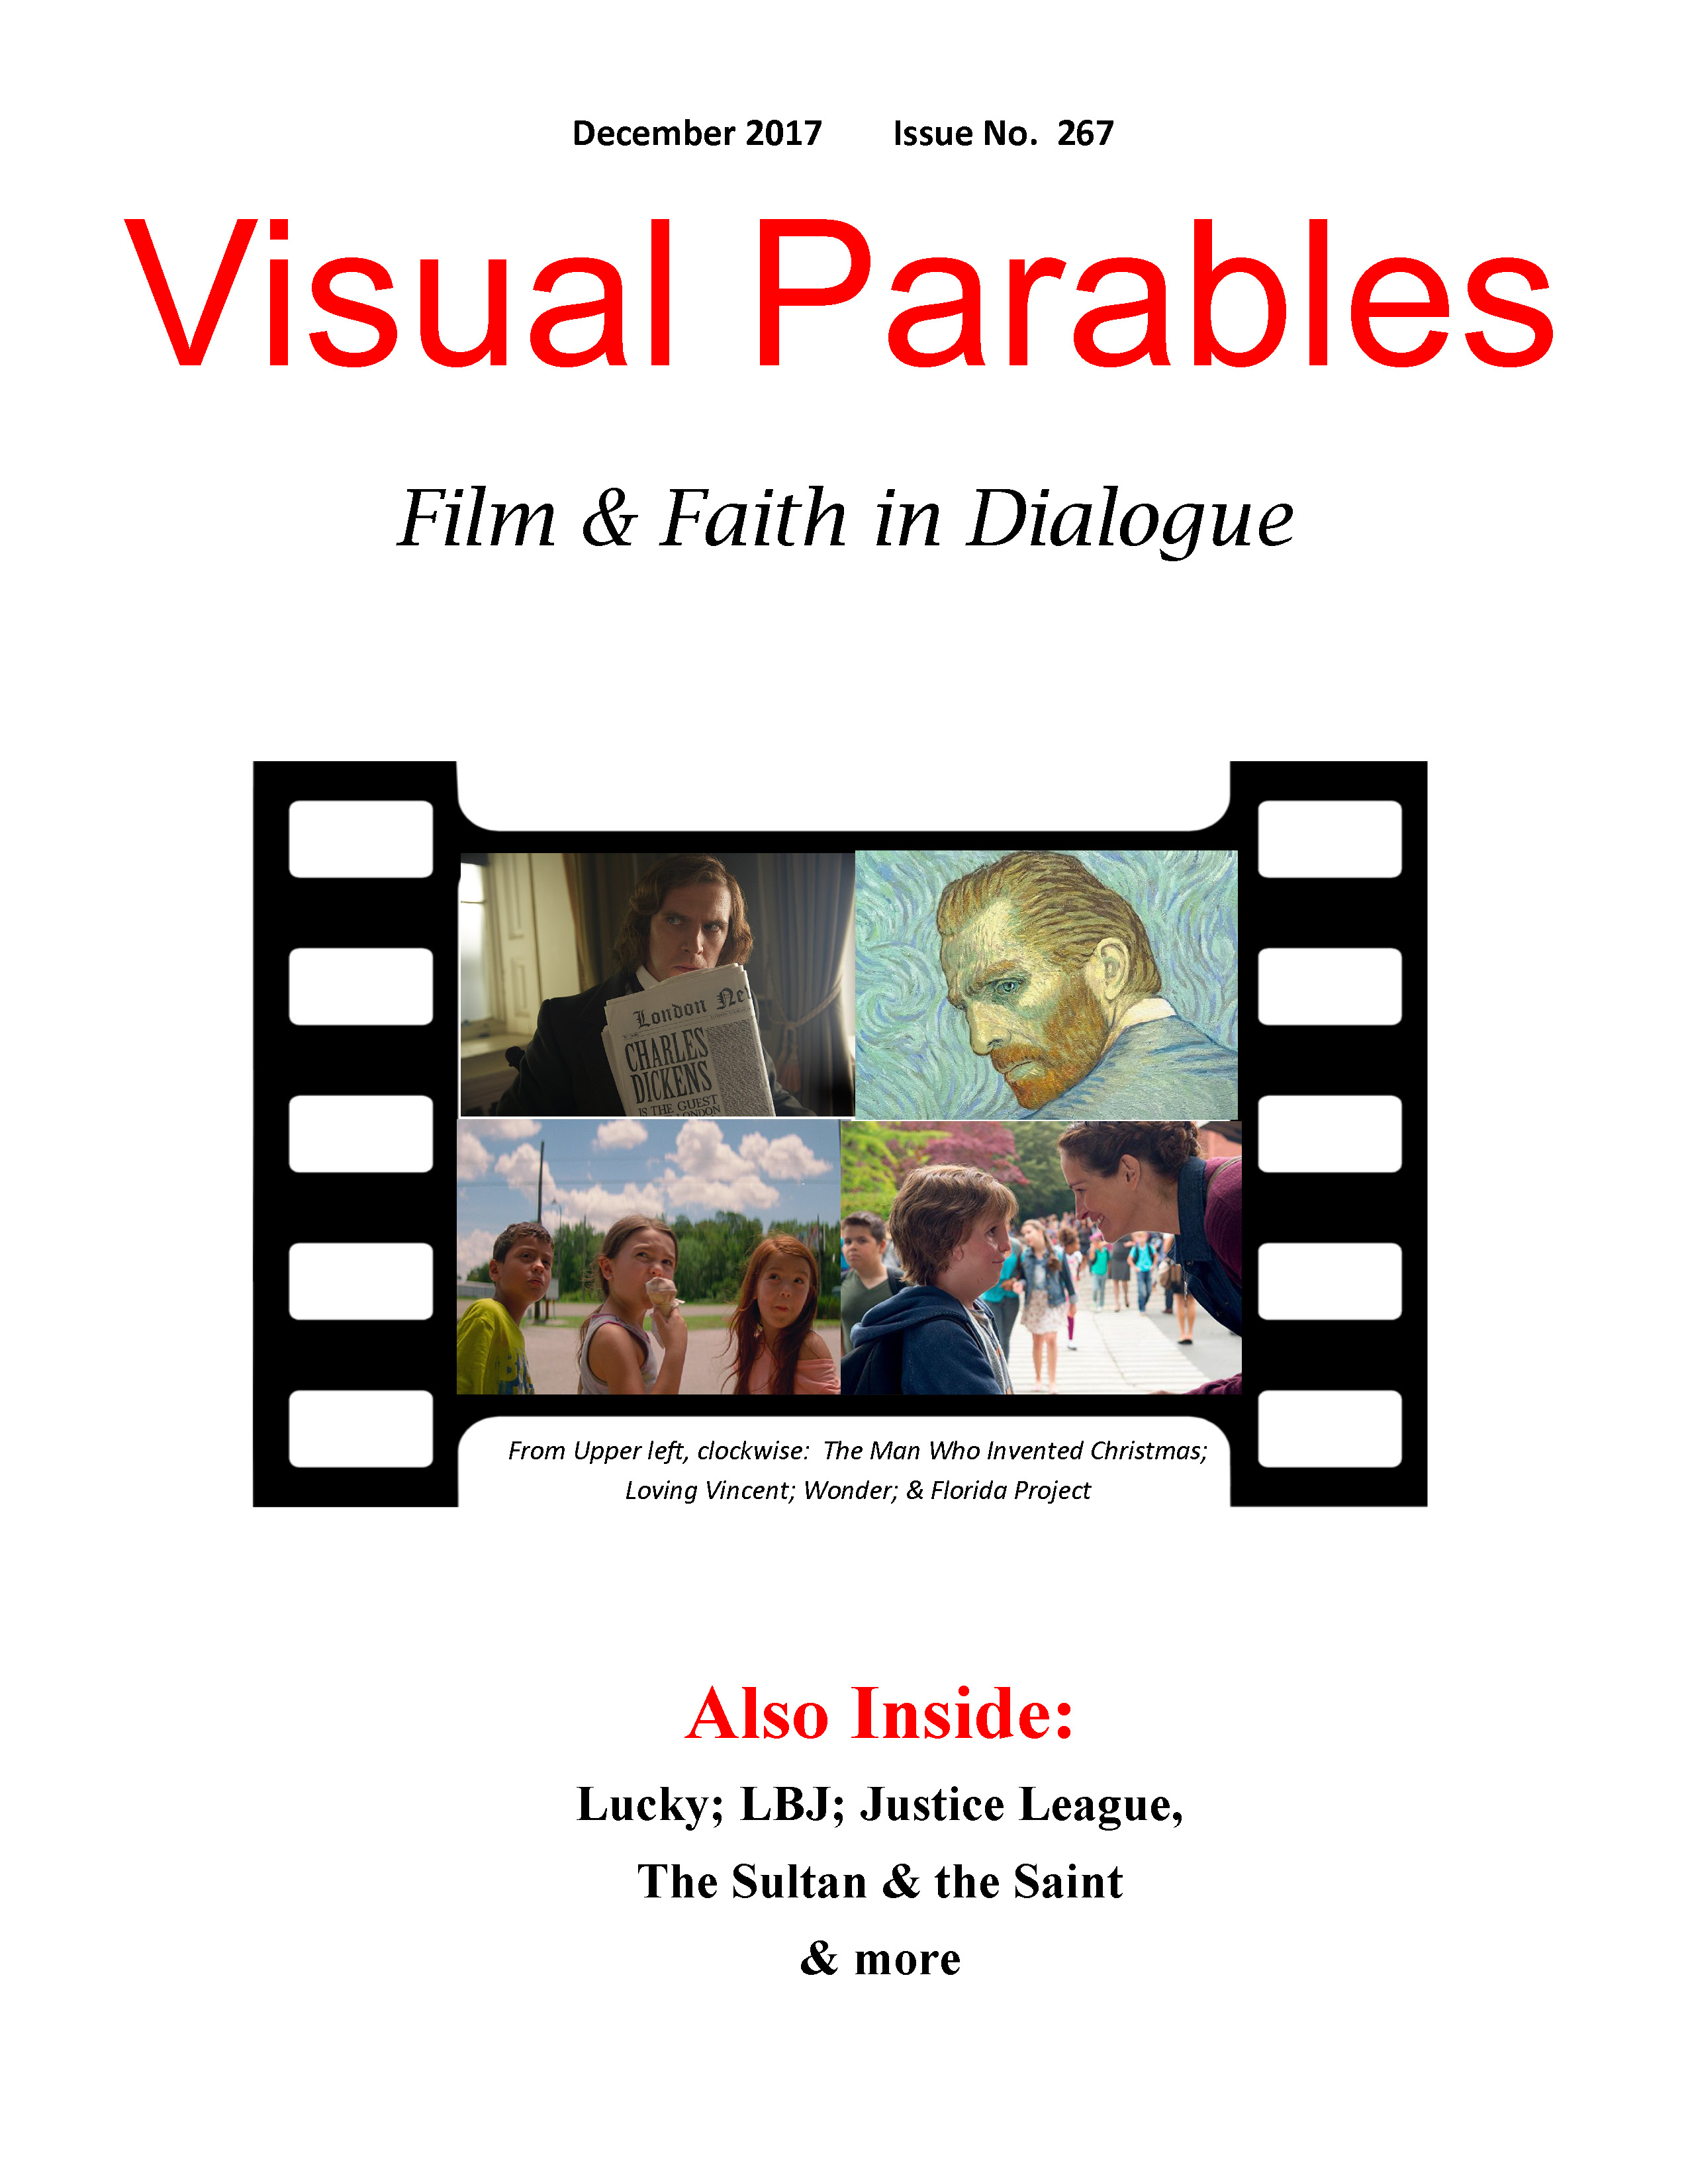 December 2017 issue of Visual Parables